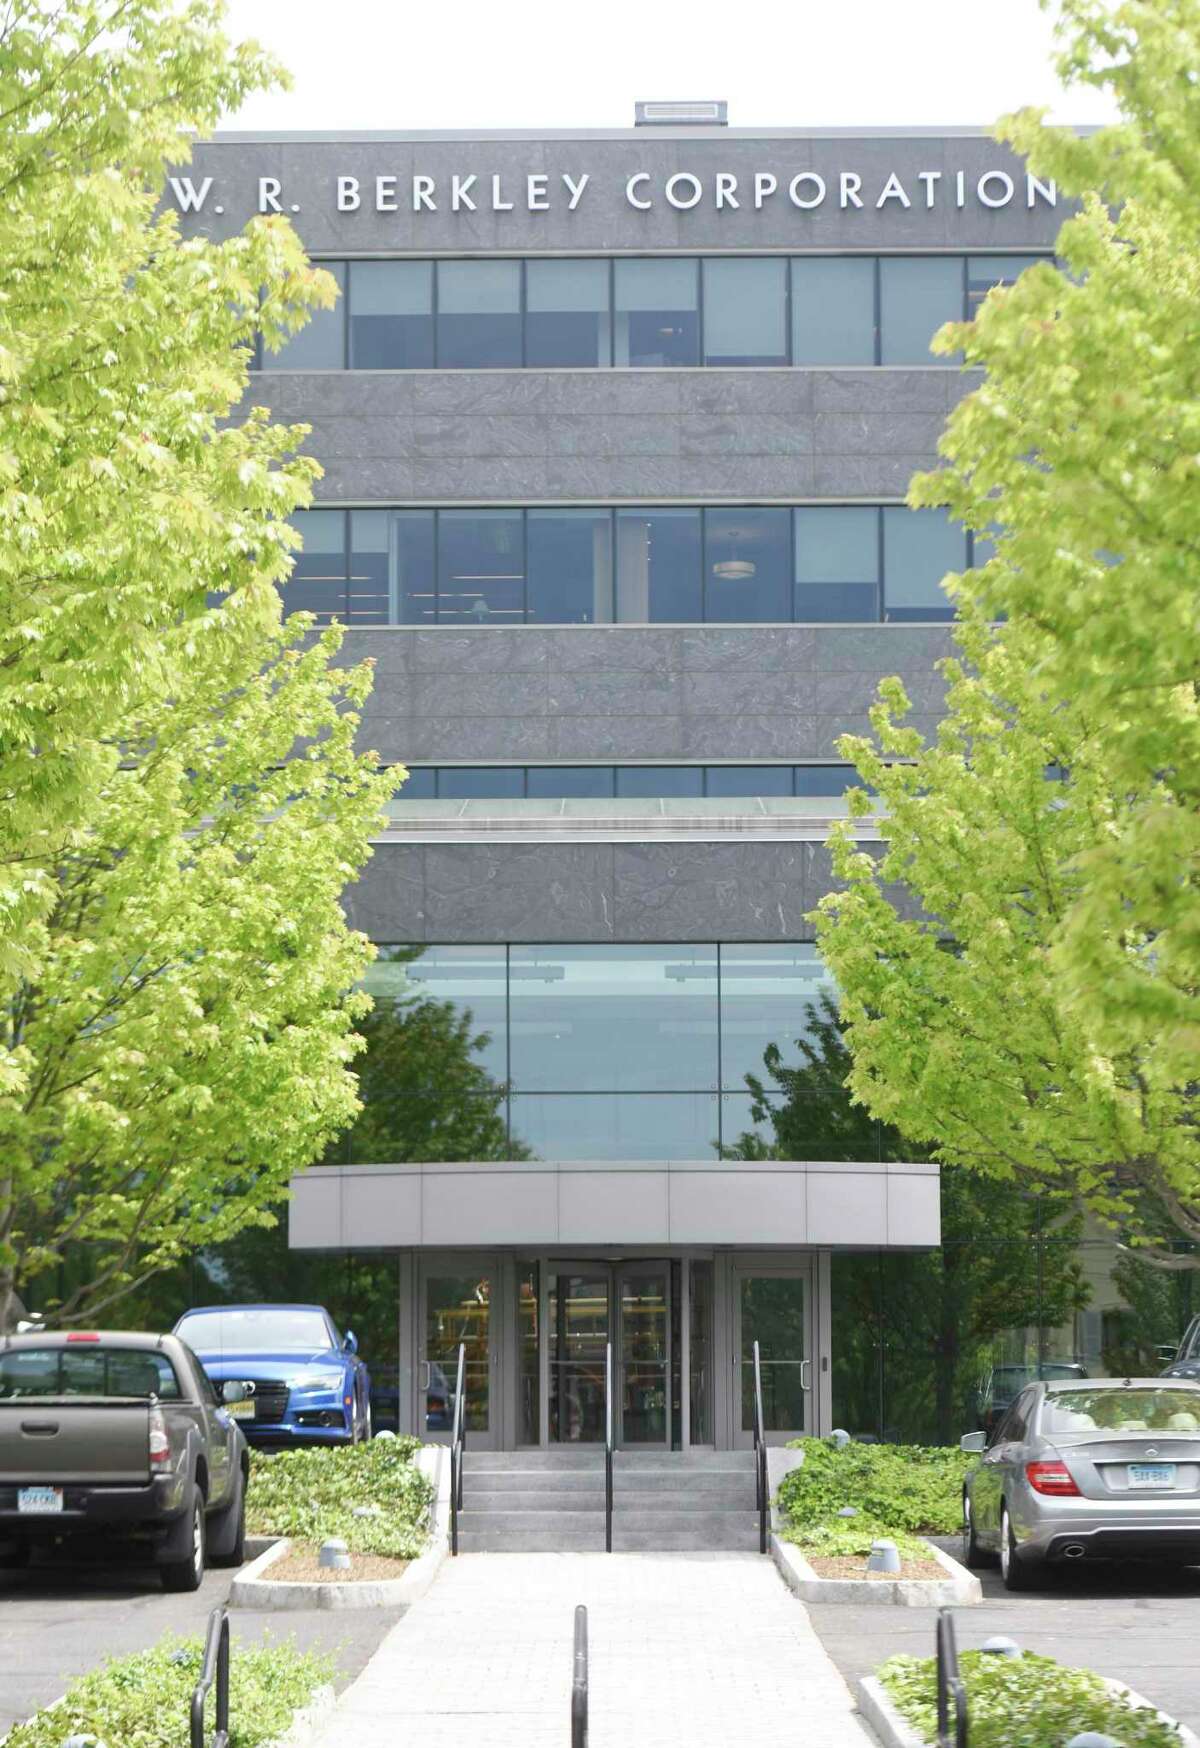 W.R. Berkley Corp. is headquartered at 475 Steamboat Road in Greenwich, Conn.